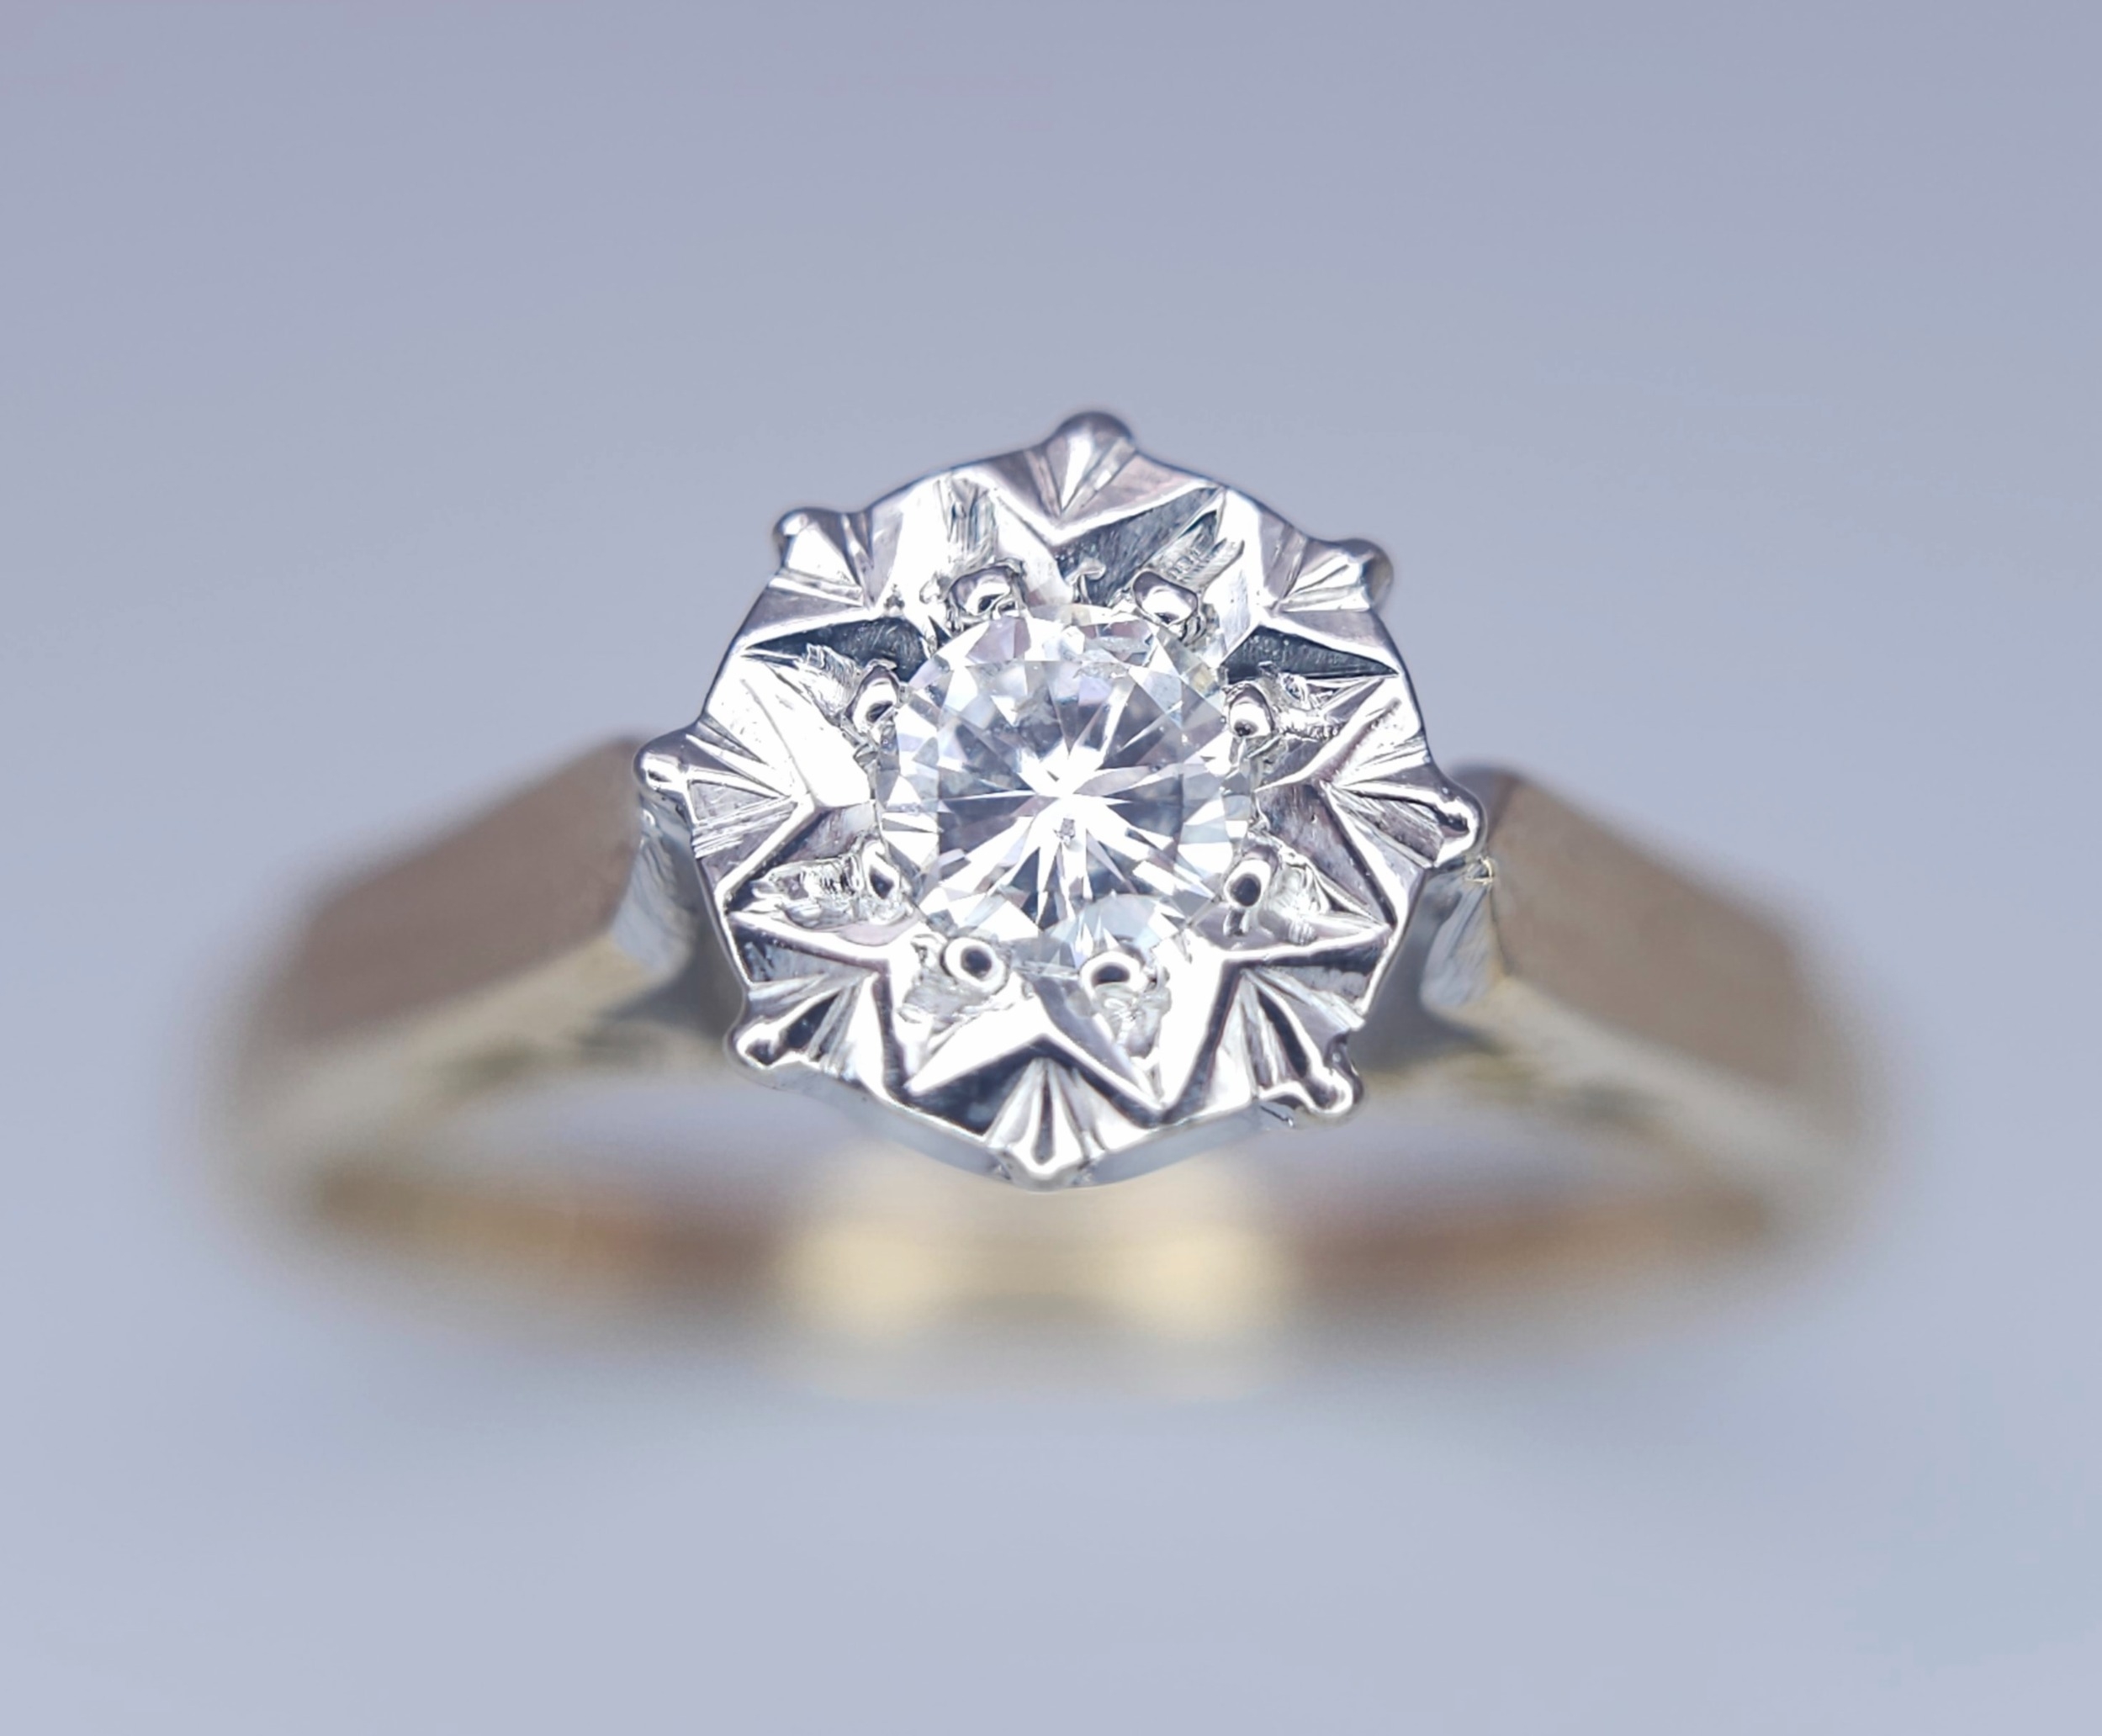 AN 18K YELLOW GOLD DIAMOND SOLITAIRE RING. 3.4G. SIZE O. - Image 2 of 7